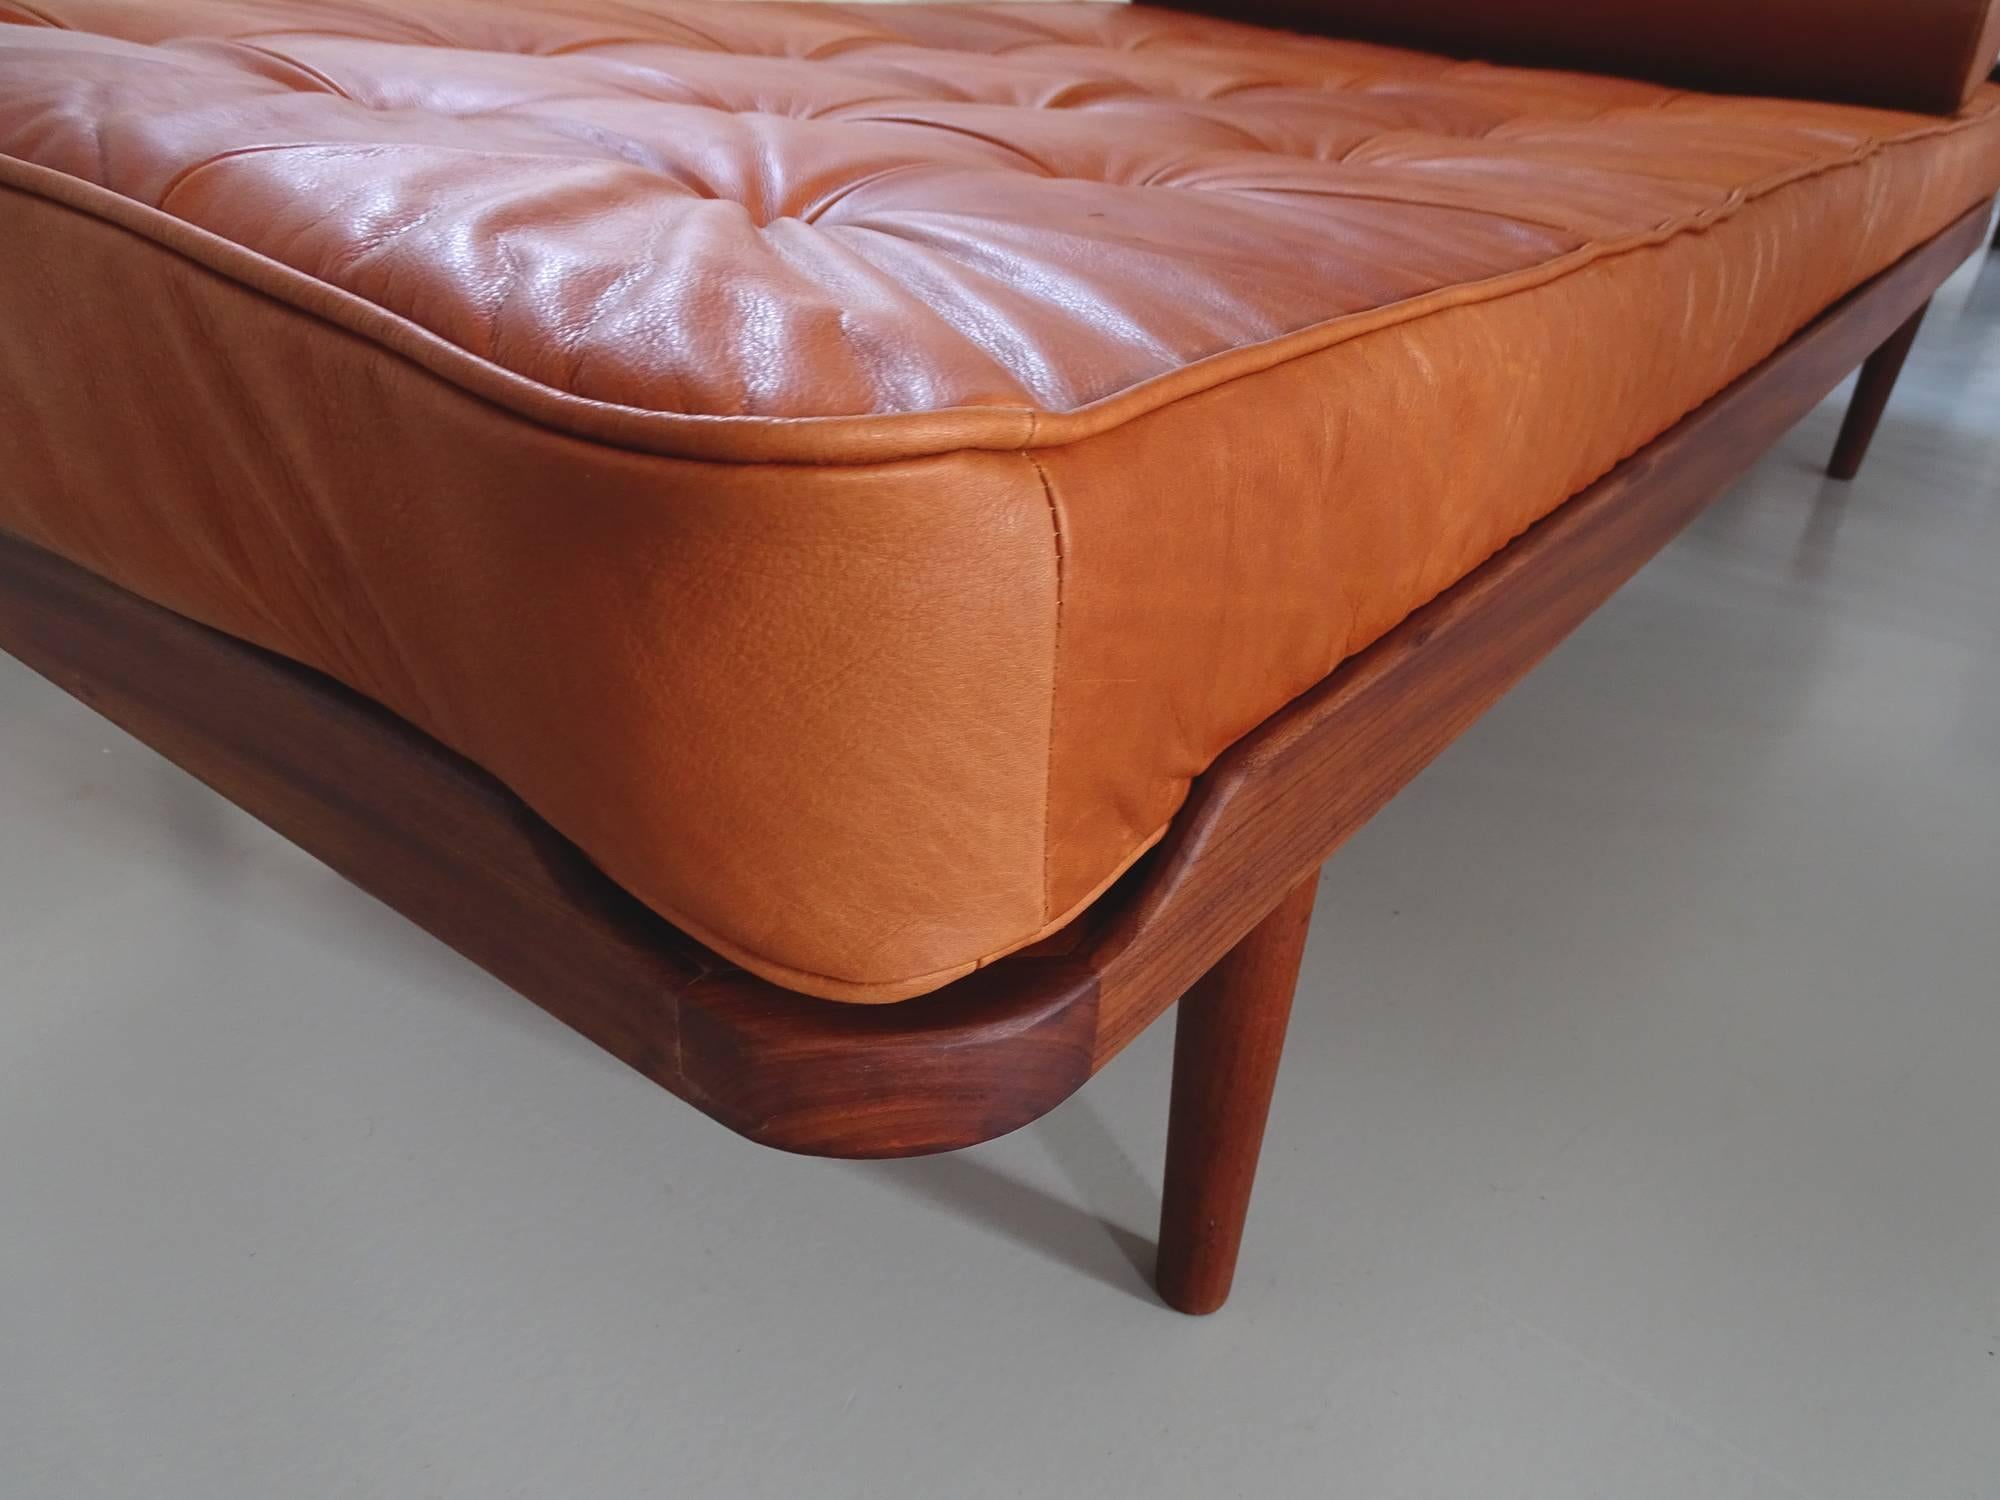 Grete Jalk Daybed in Teak and Cognac Leather for P. Jeppesen, Denmark, 1960 For Sale 4